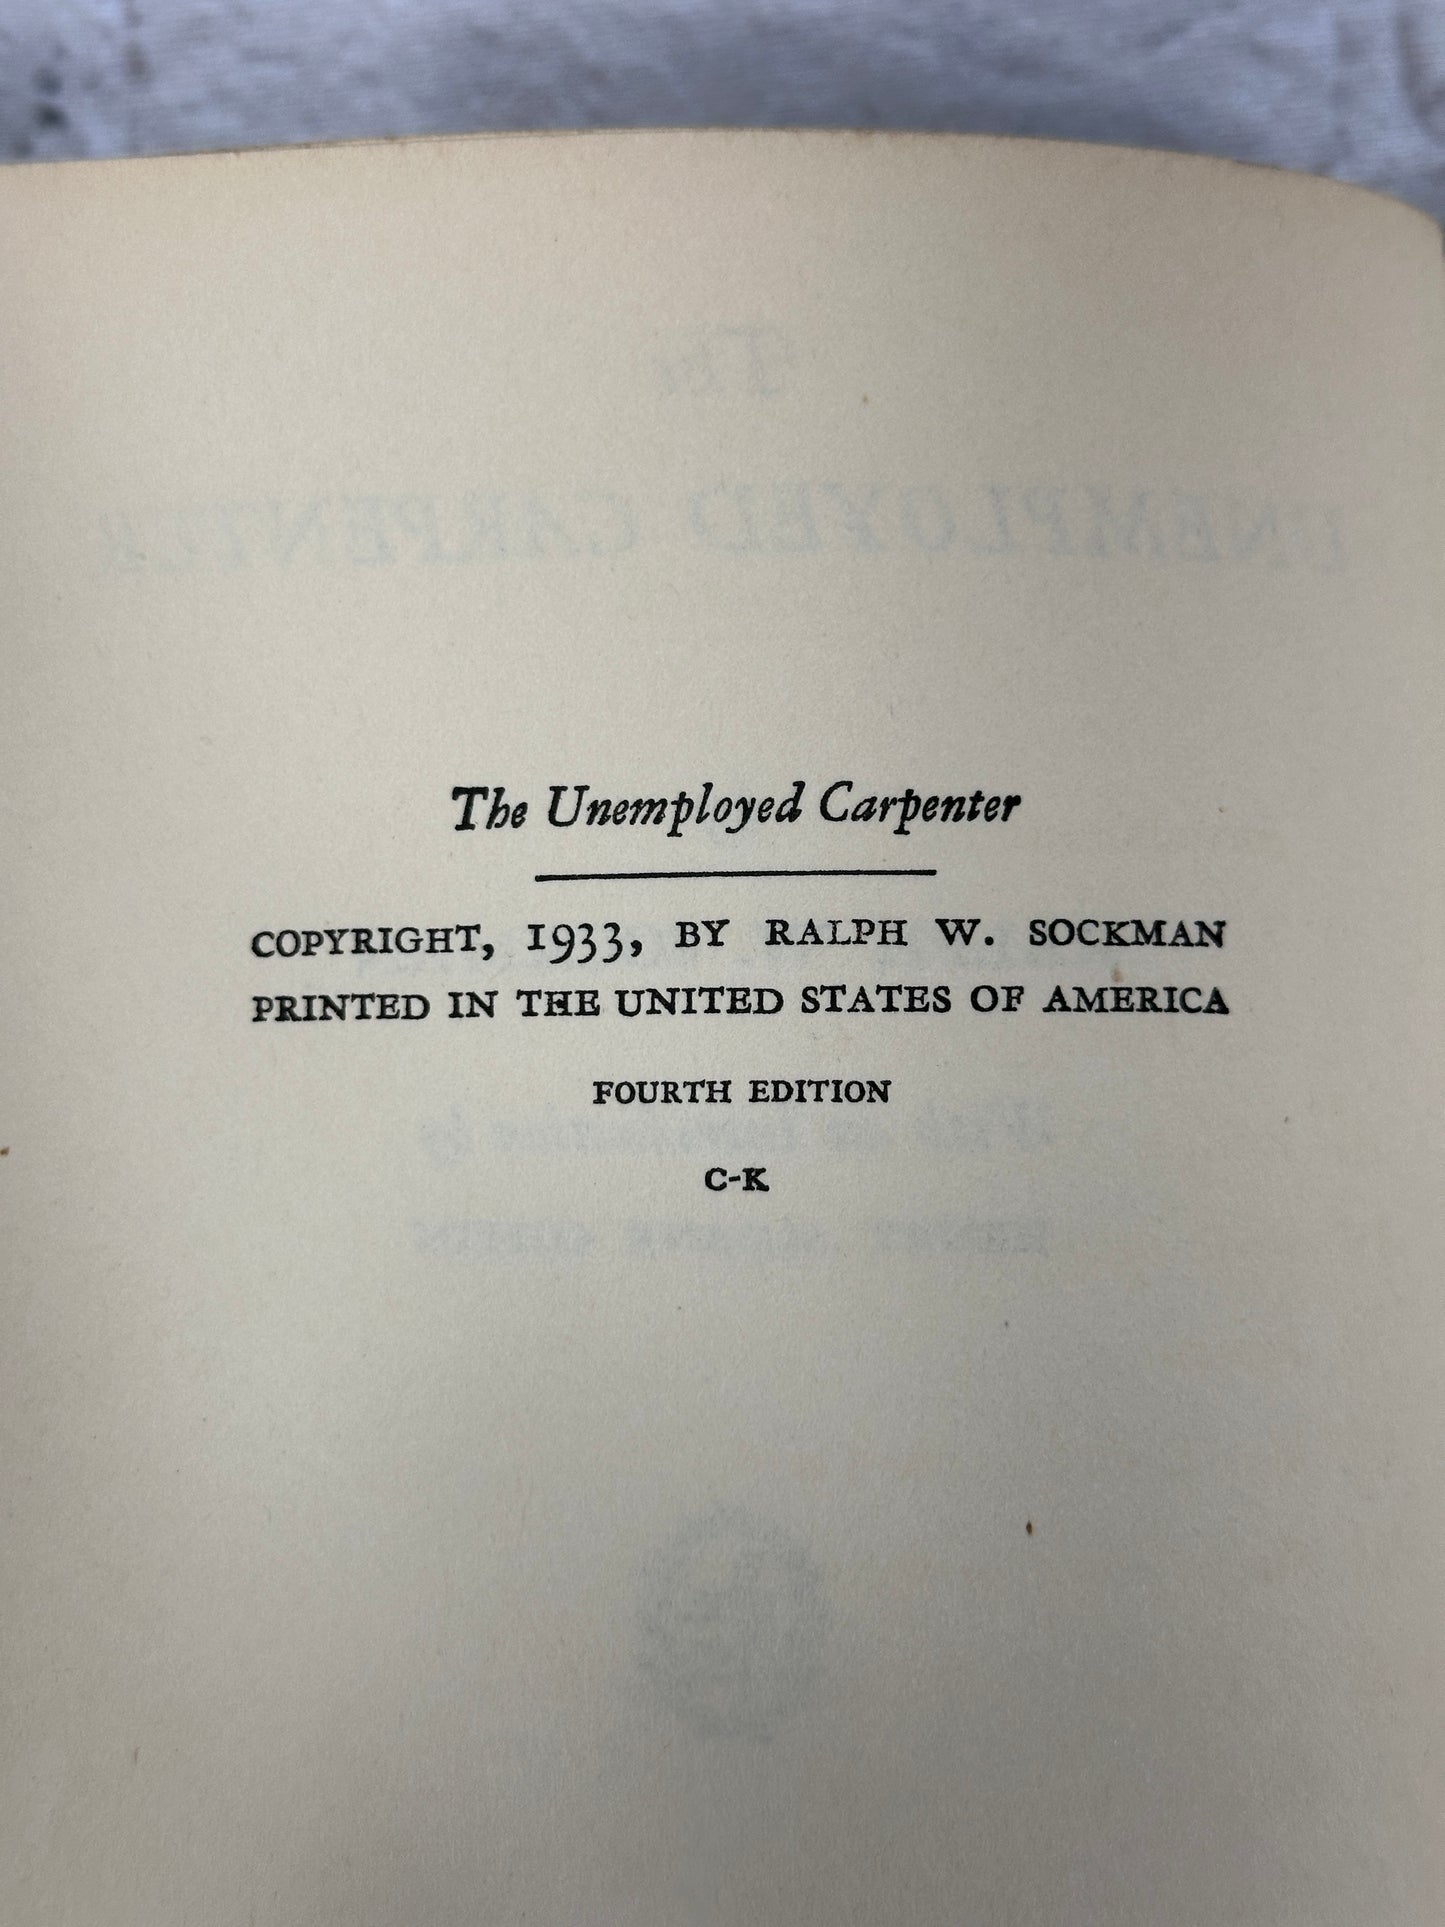 The Unemployed Carpenter by Ralph W. Sockman [1933 · 4th Edition· Signed]